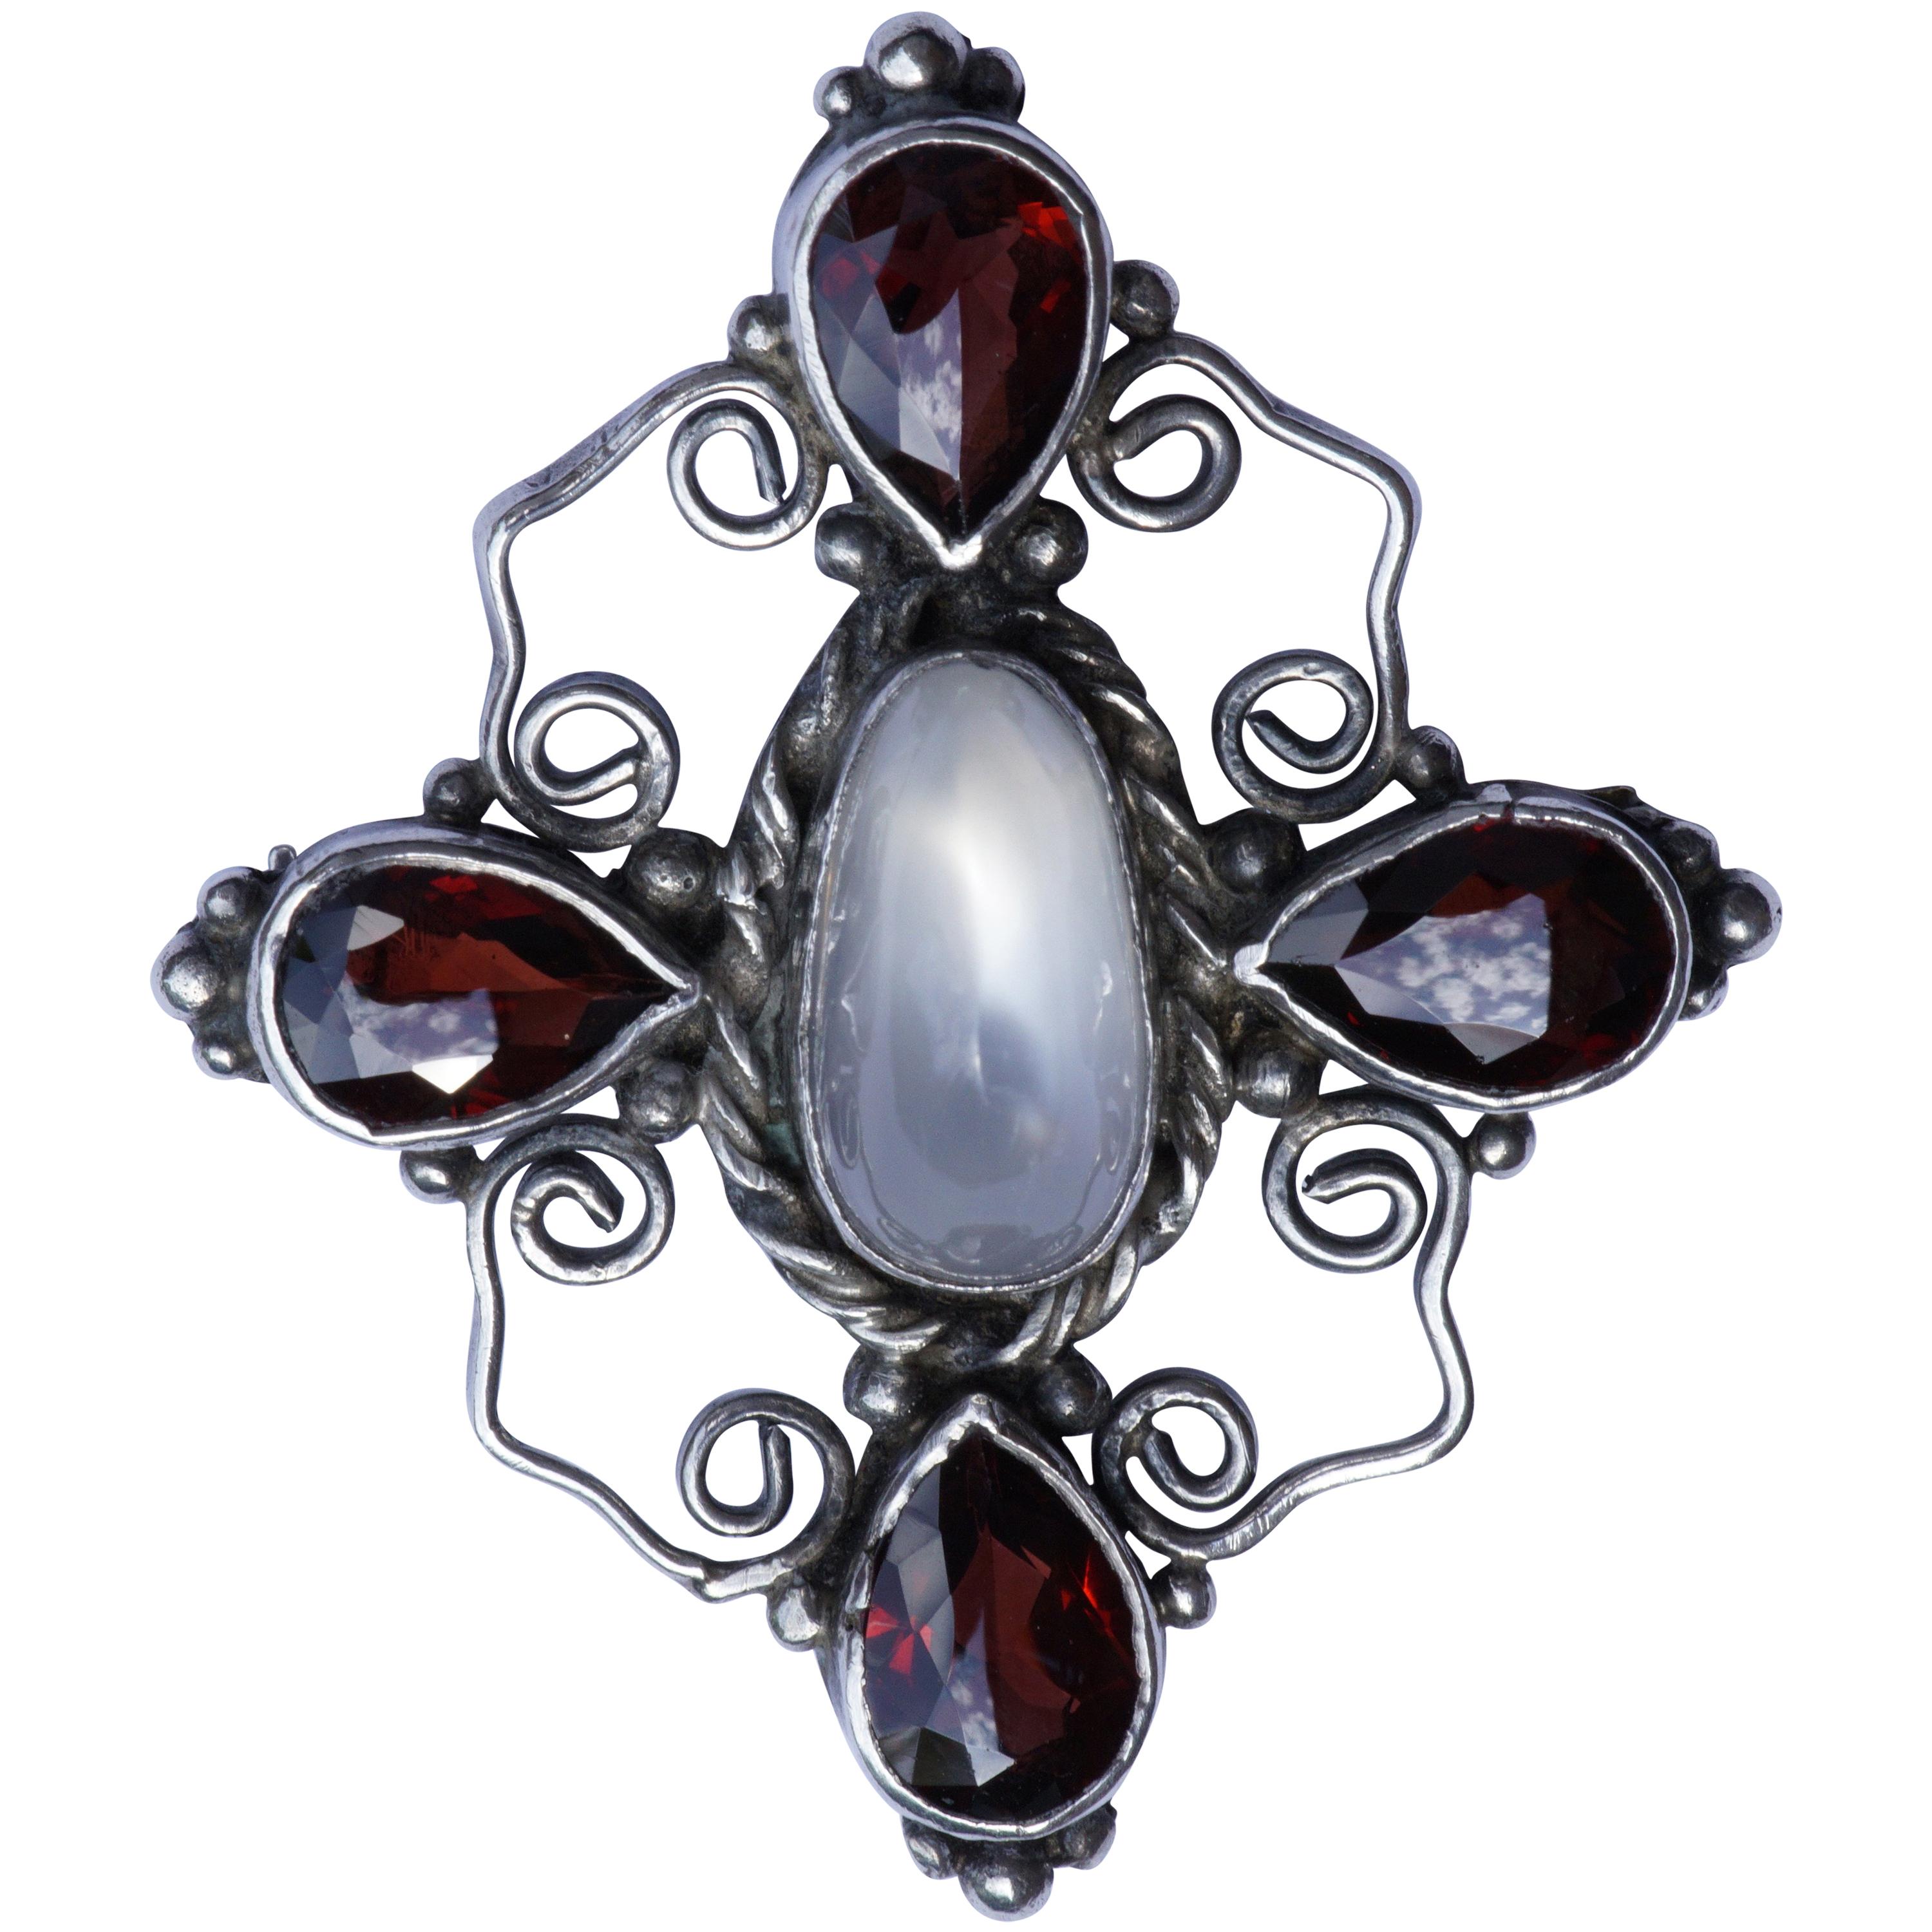 Hand Made Silver Brooch with a Faux Moonstone and Faux Garnets circa 1920s For Sale